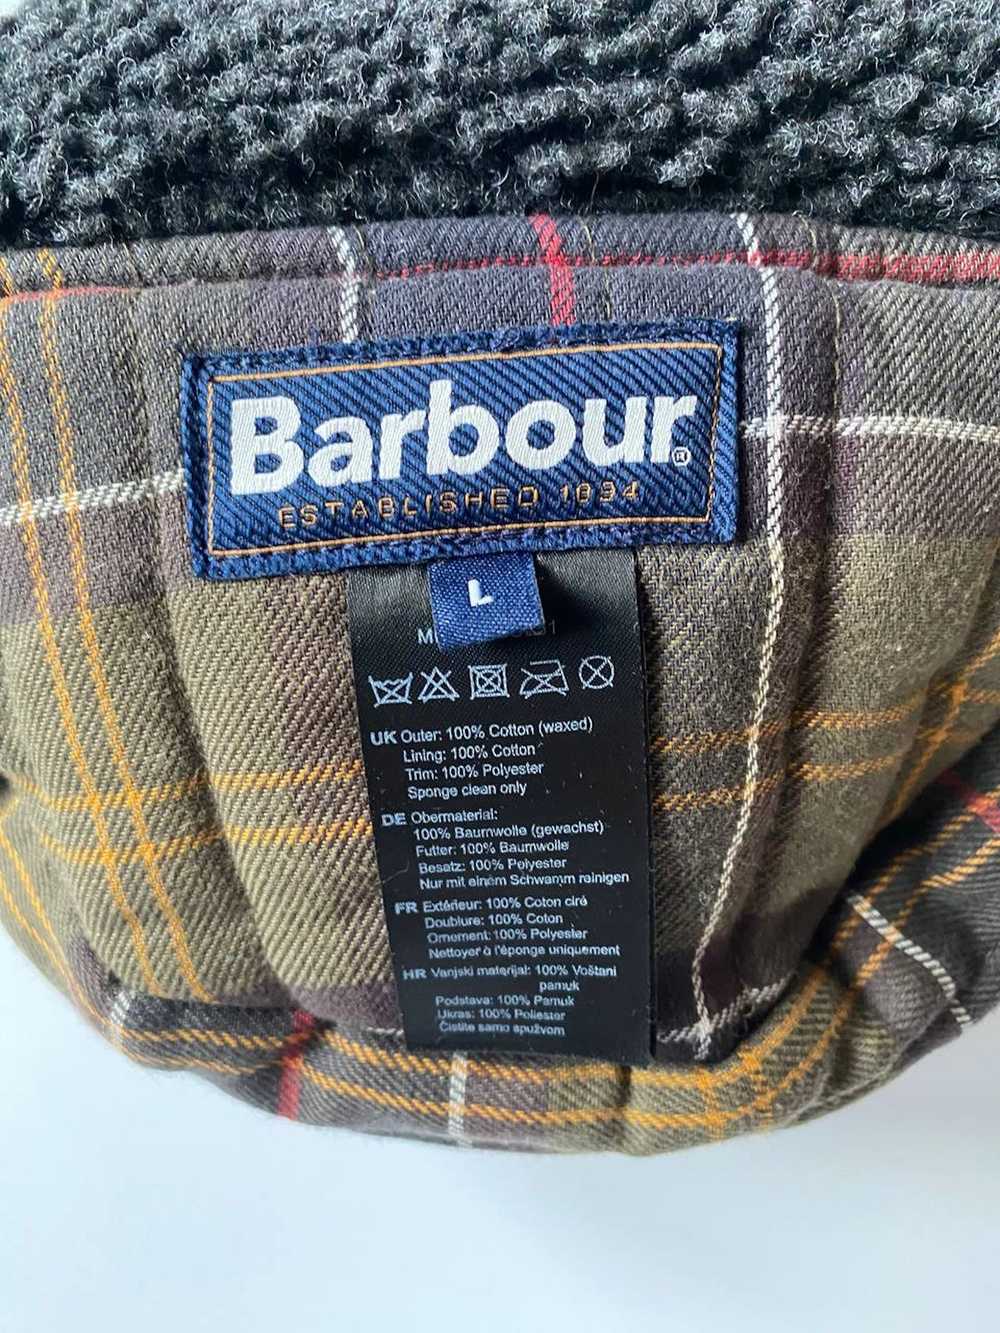 Barbour Barbour Wax Winter Hat size Large - image 5